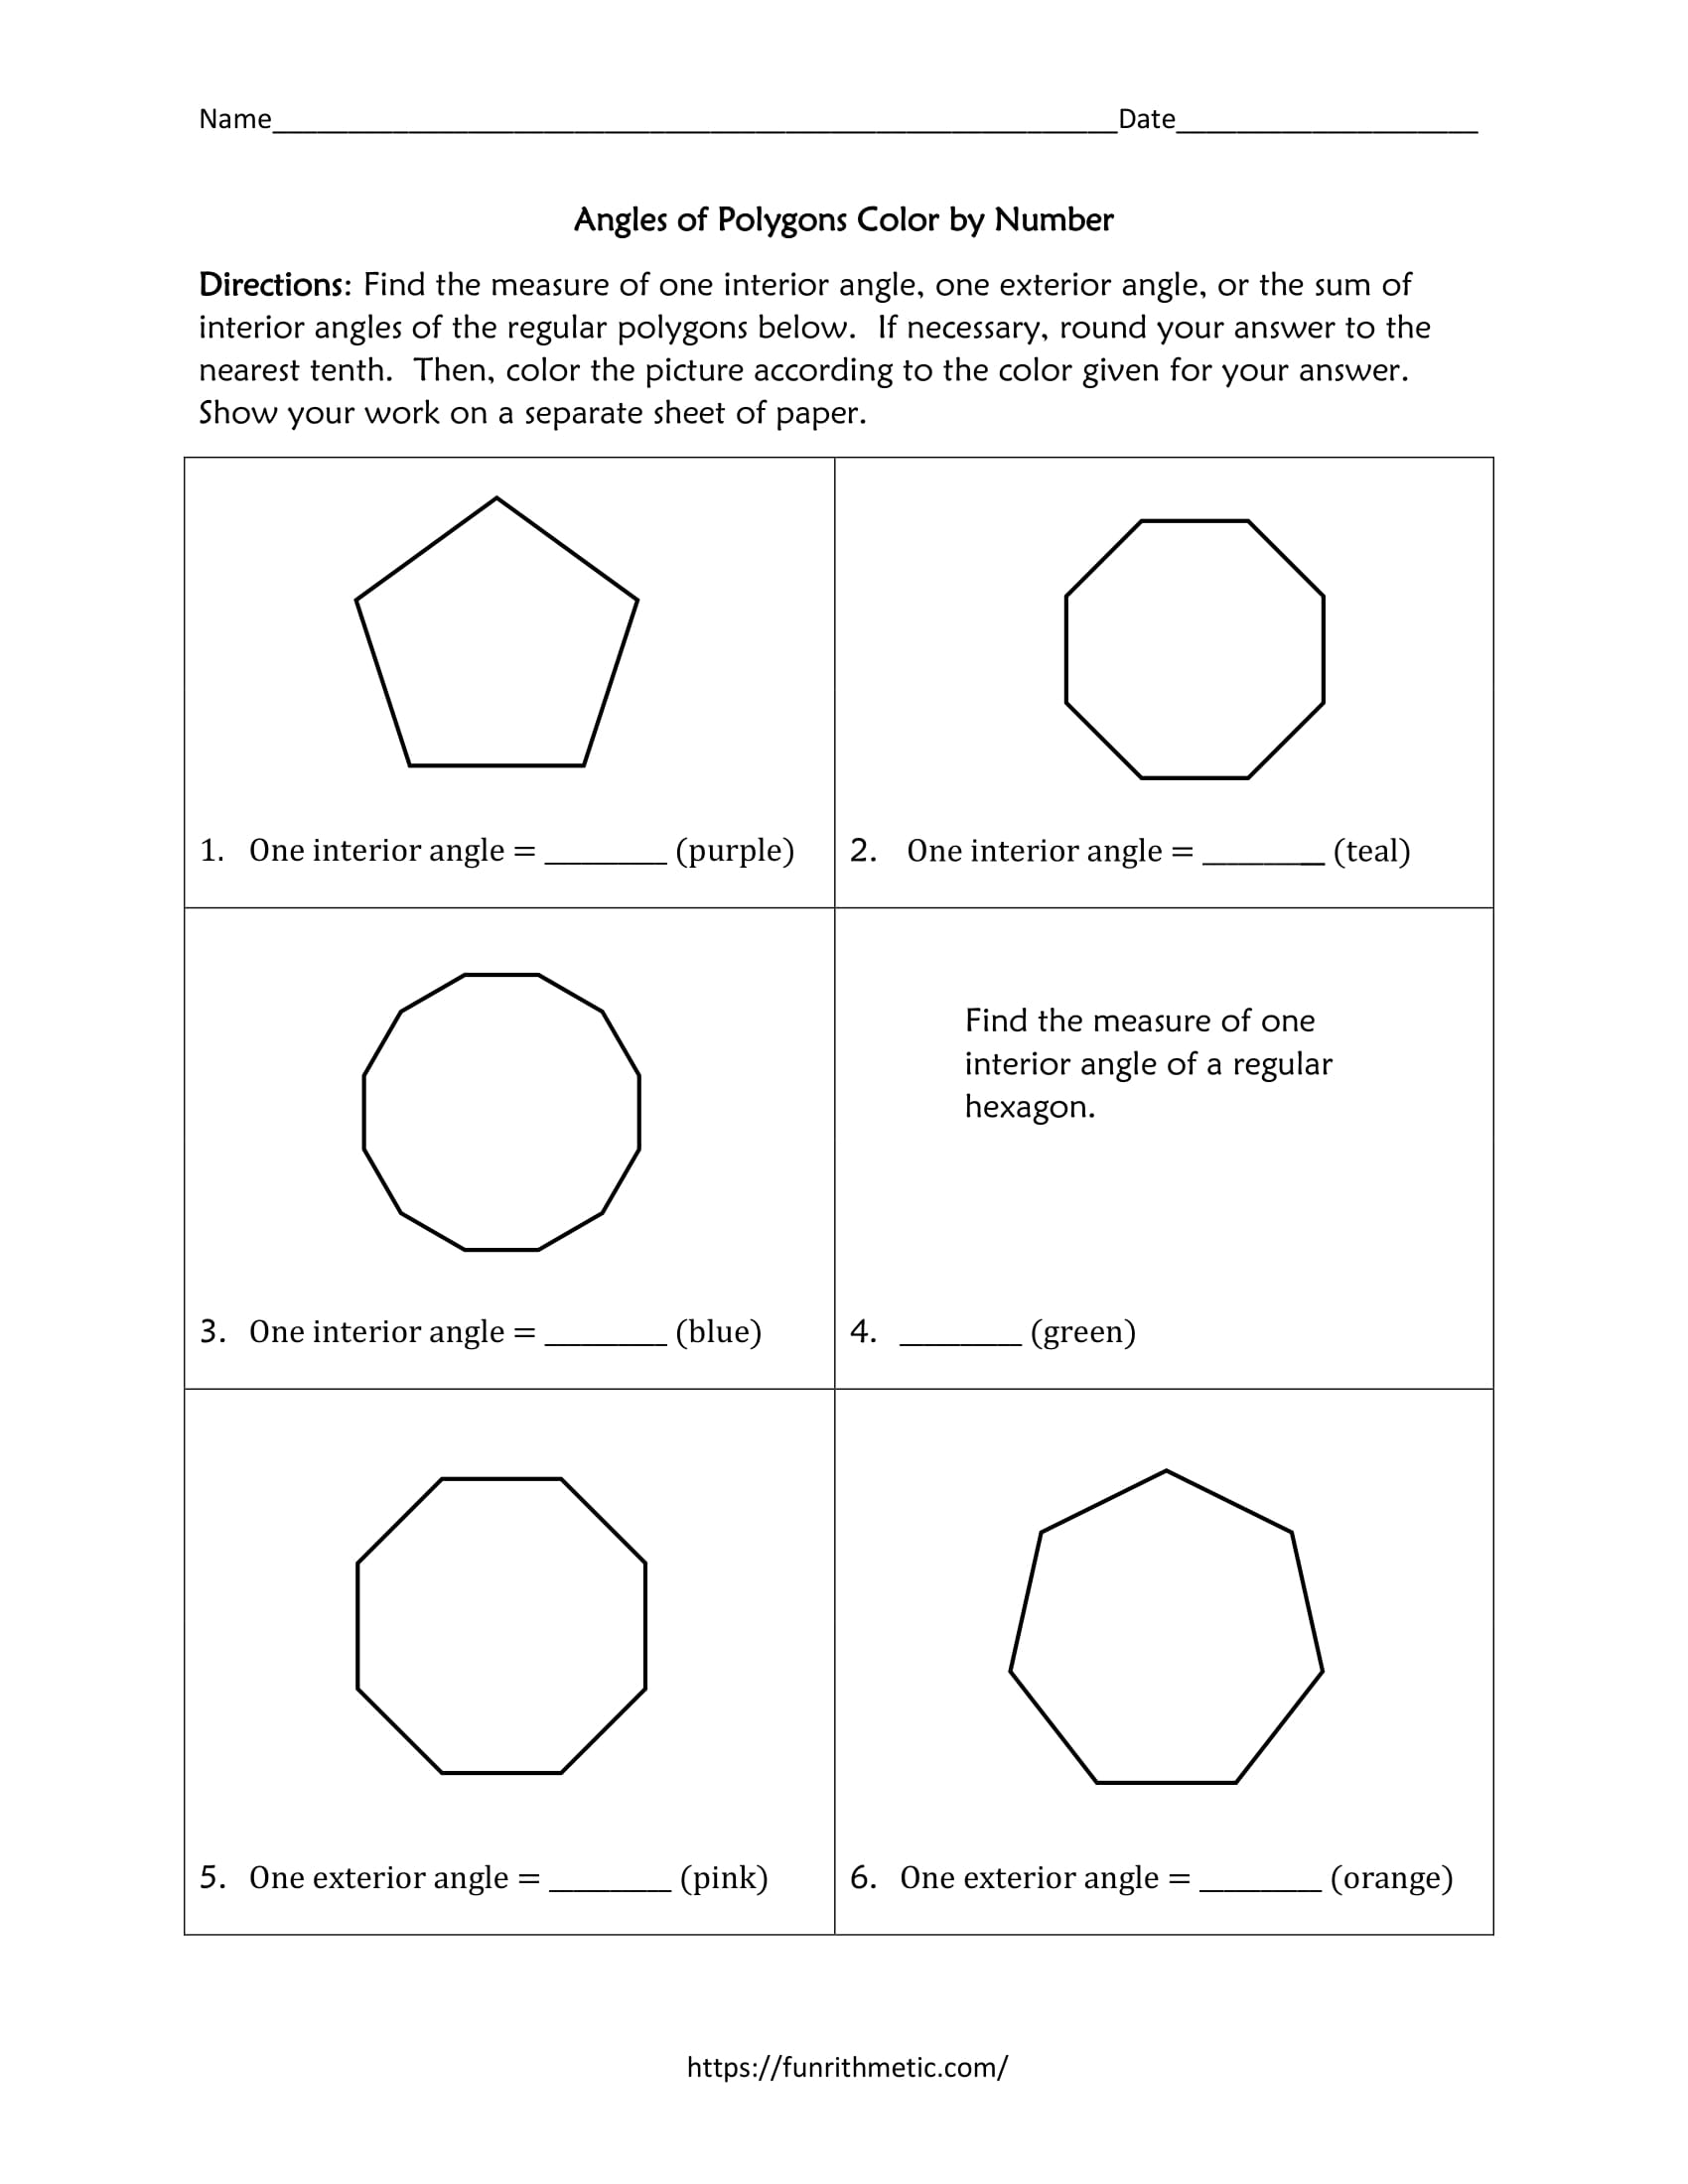 Angles of Polygons Color by Number | Funrithmetic